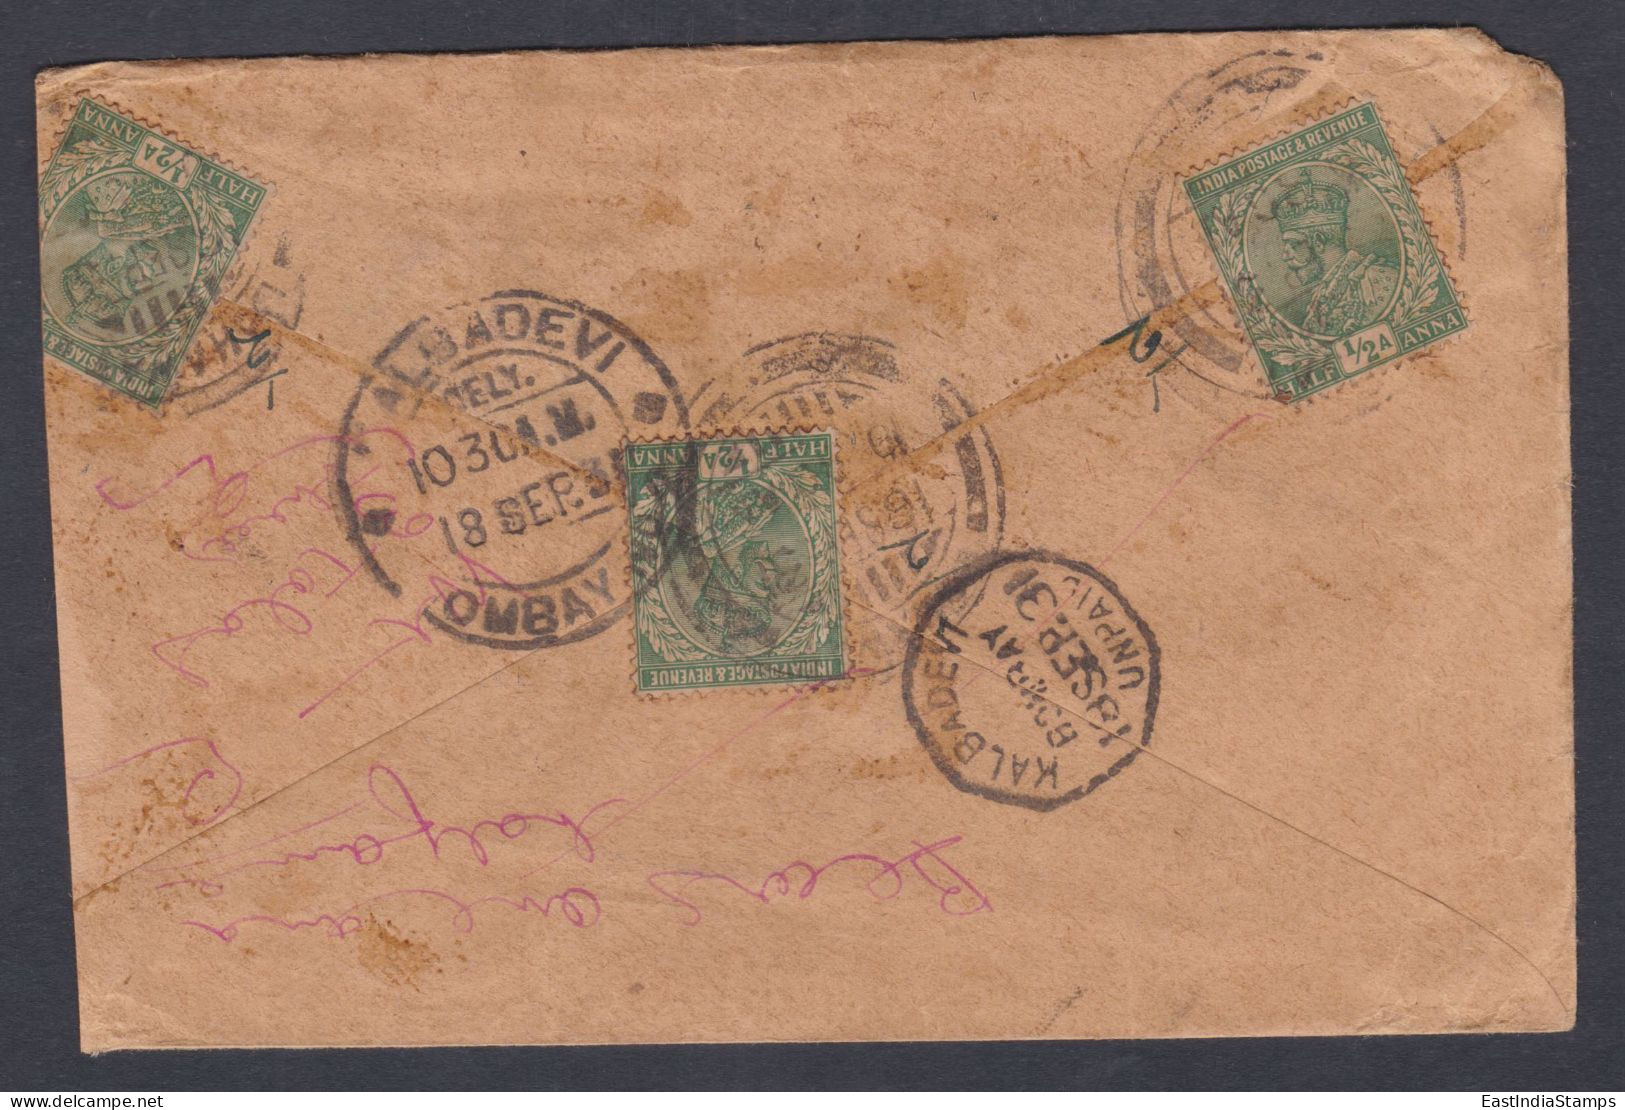 Inde British India 1931 Used Postage Due Cover, To Bombay, King George V Stamp - 1911-35 Roi Georges V